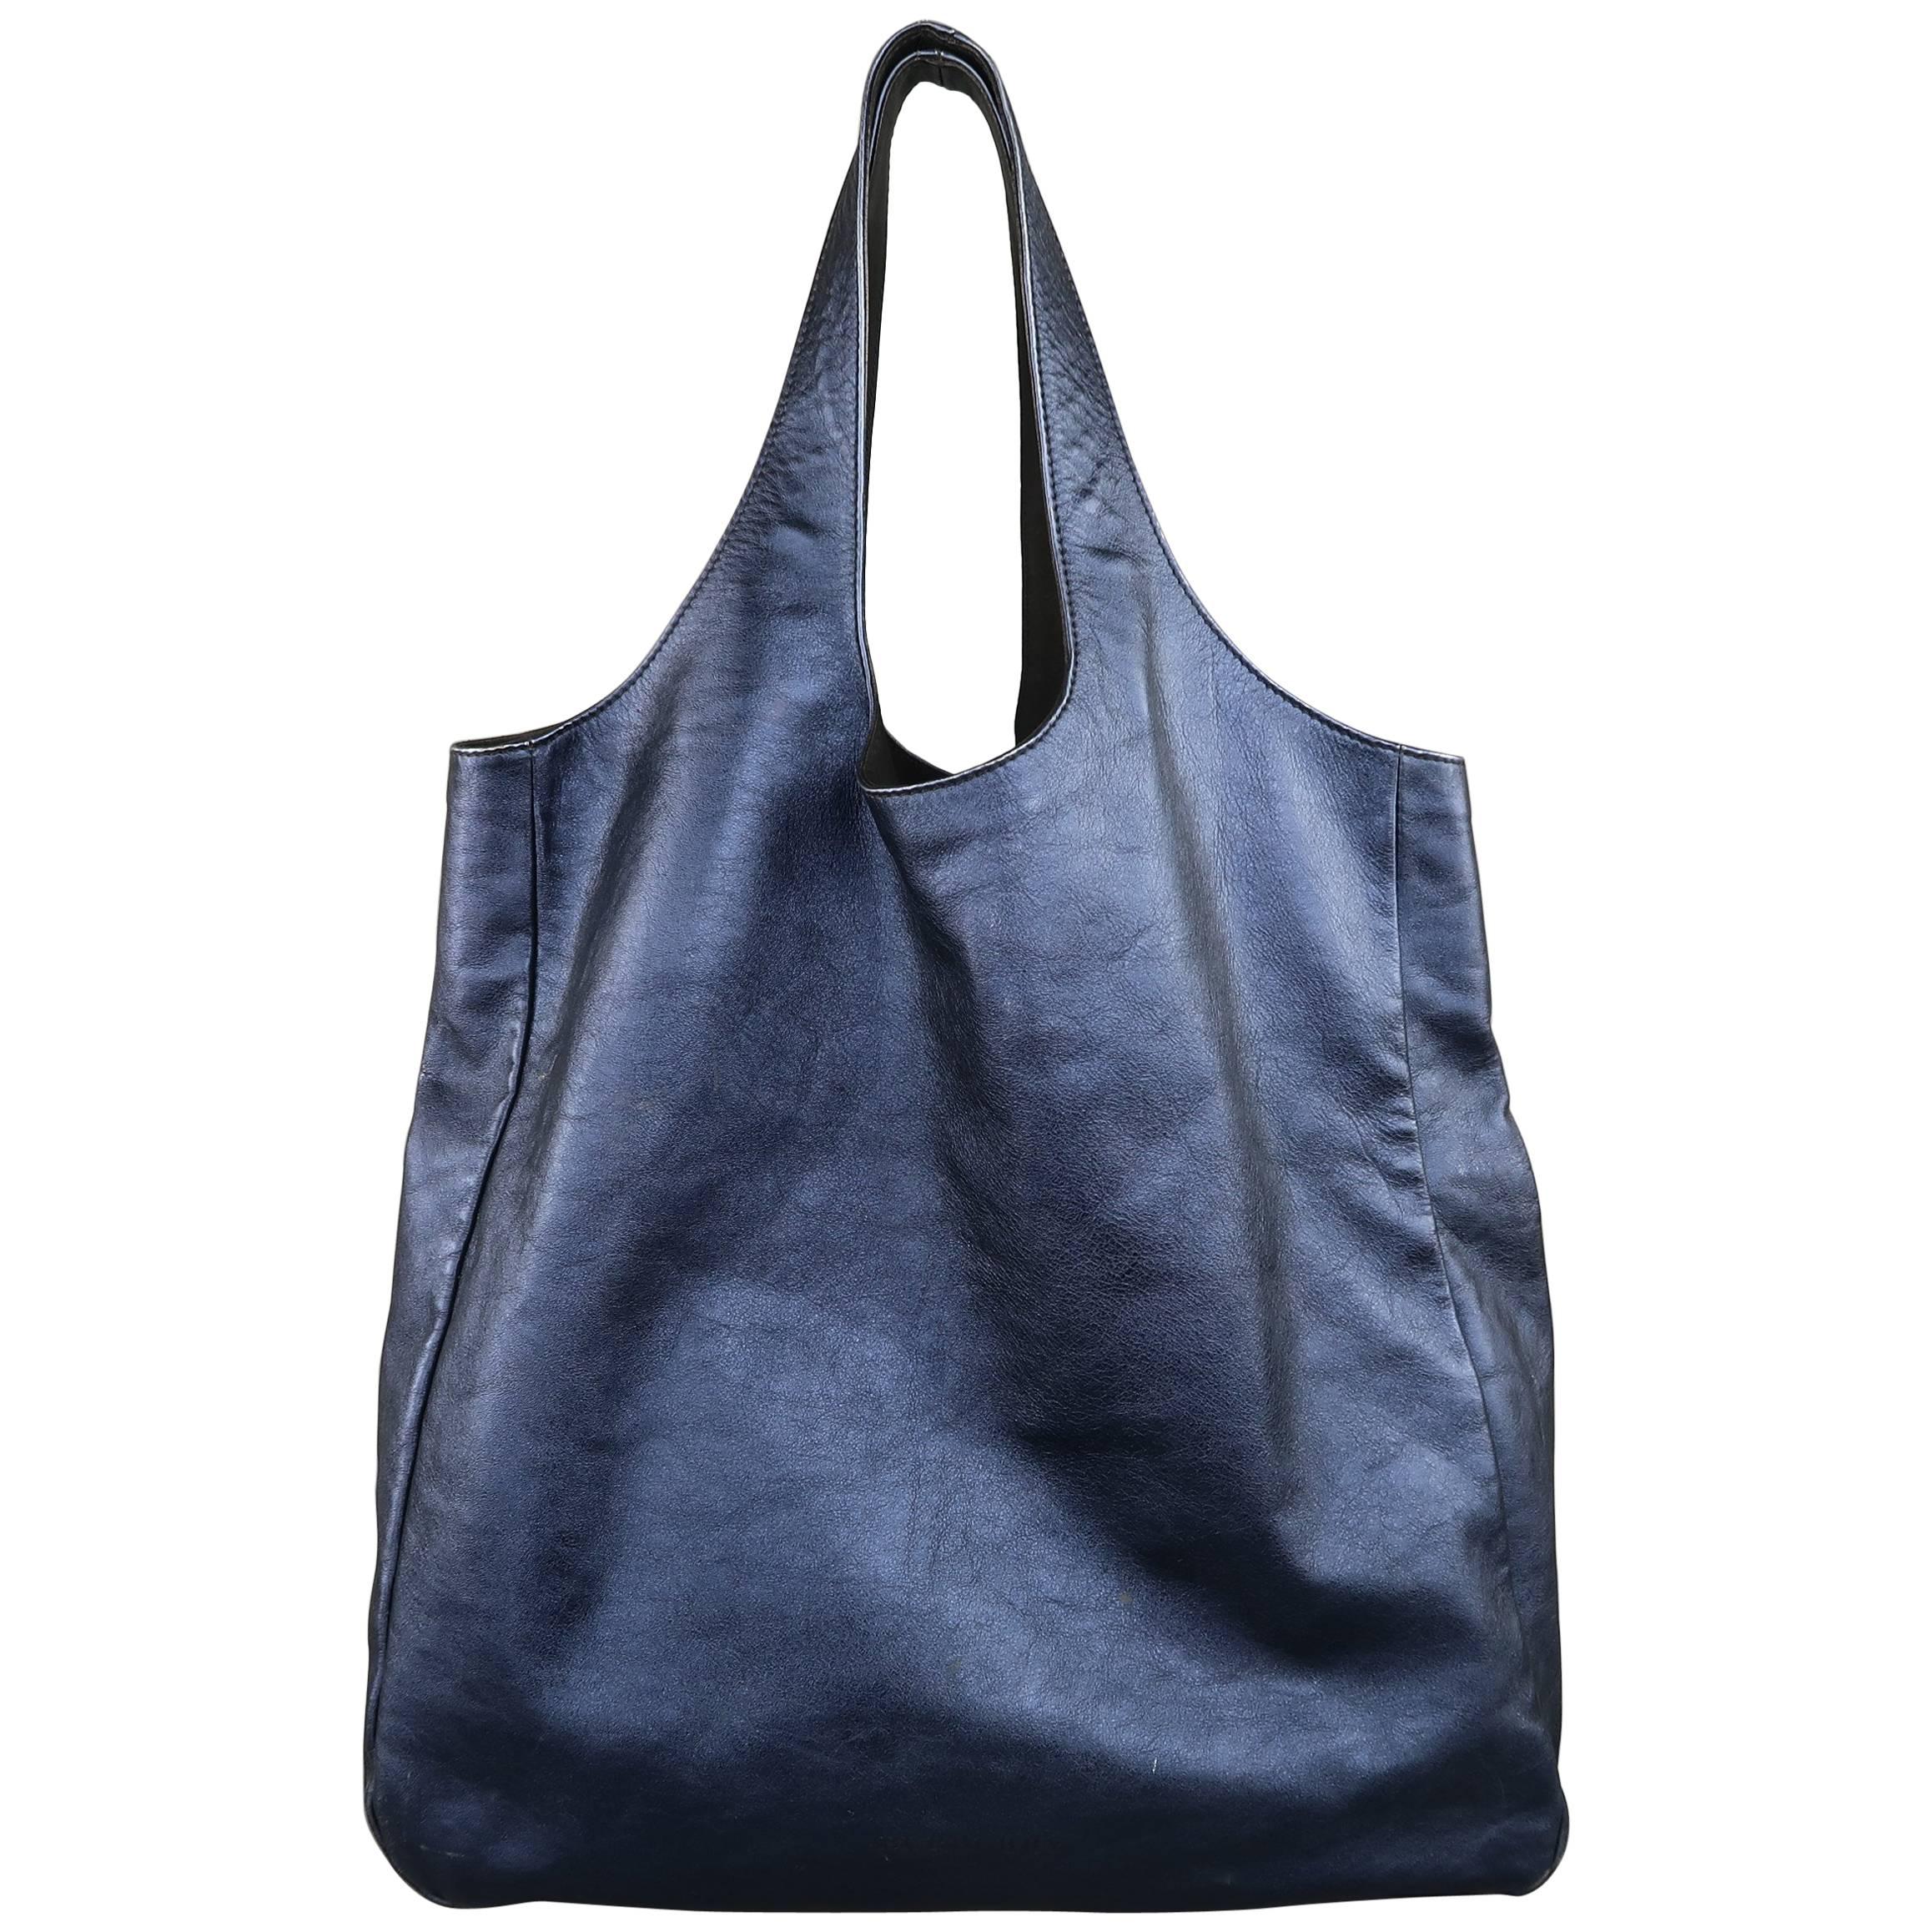 Burberry Prorsum Metallic Navy Leather Shoulder Tote Bag, Spring 2013 Collection